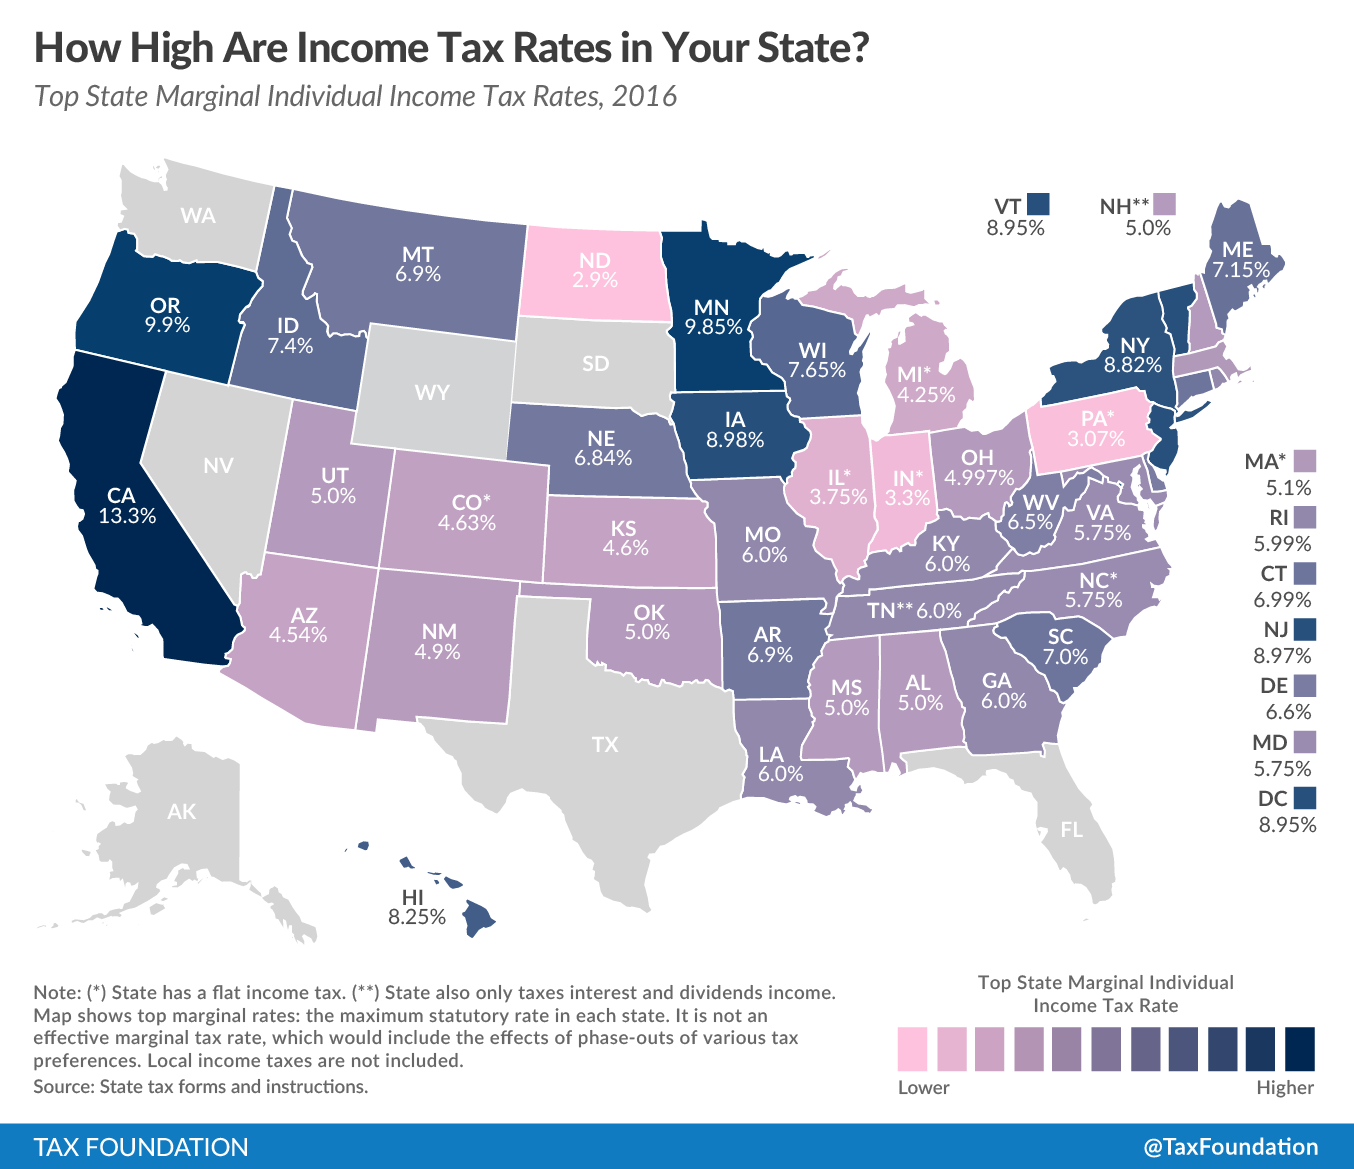 How High are Tax Rates in Your State?